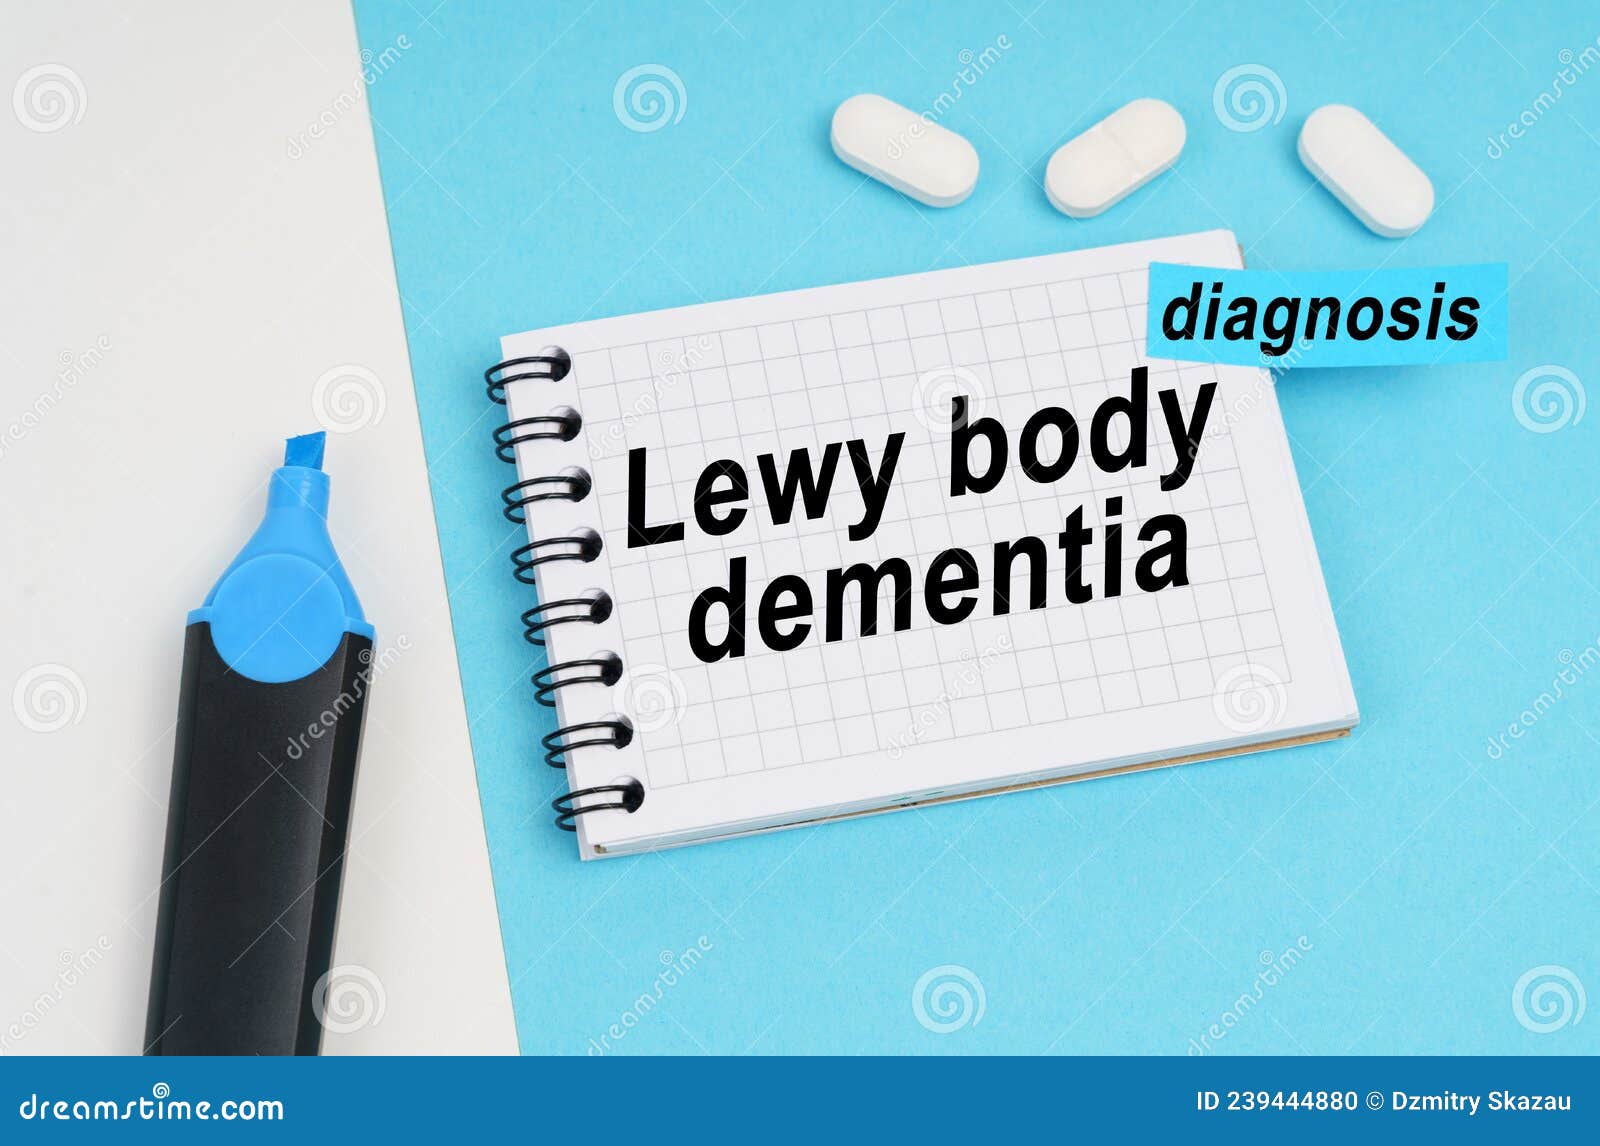 on a white and blue surface are pills, a marker and a notebook with the inscription - lewy body dementia